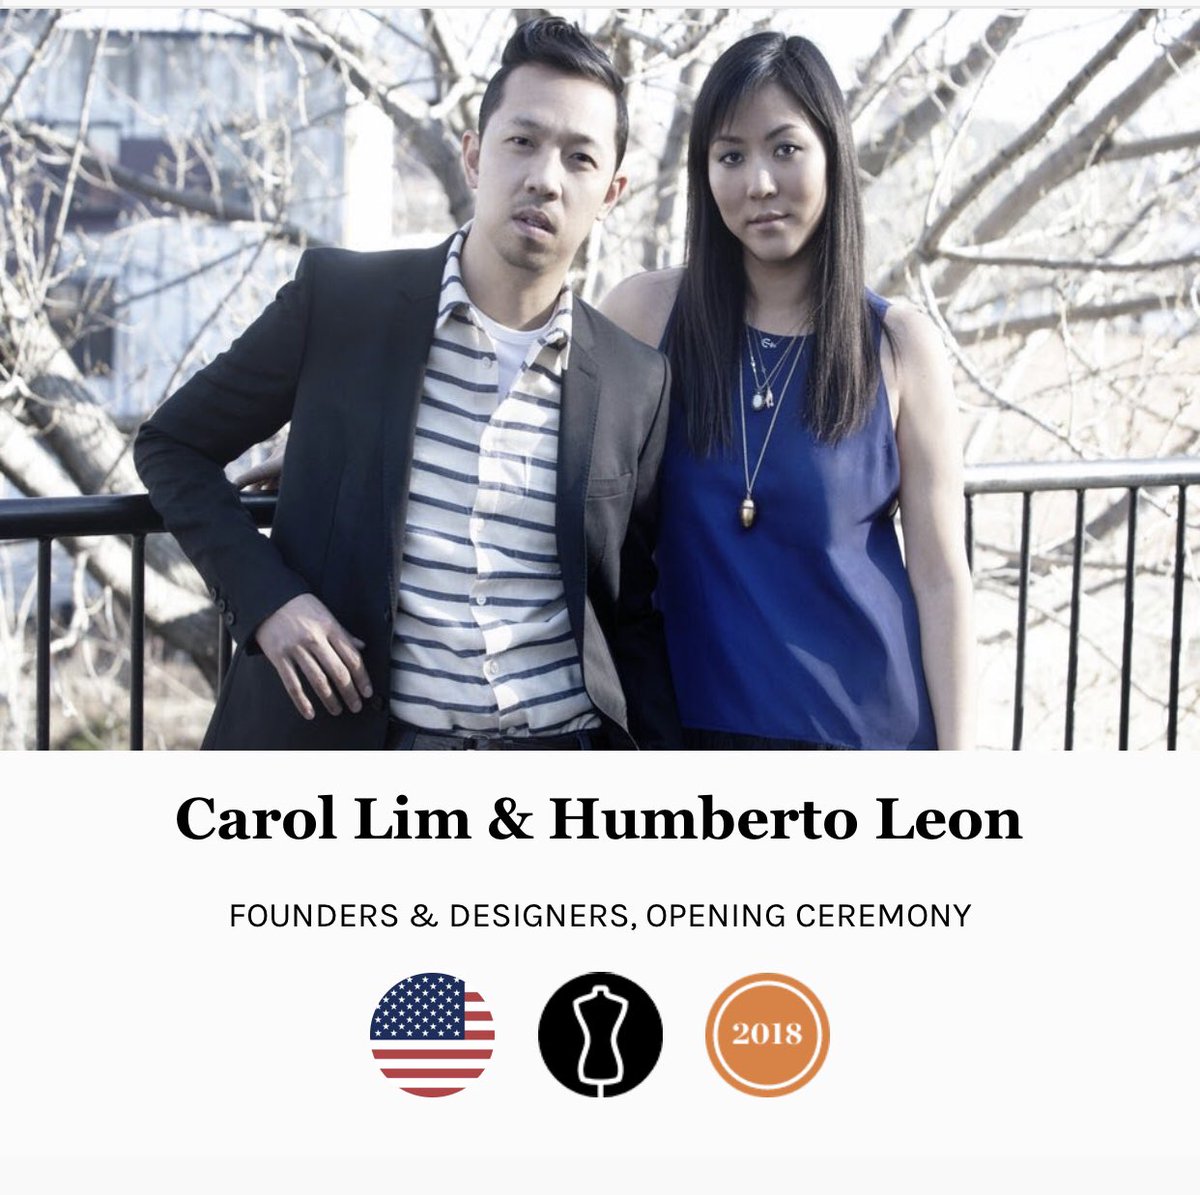 HUMBERTO LEON and CAROL LIM(Former Creative Directors of KENZO,Opening Ceremony Founders & Designers)